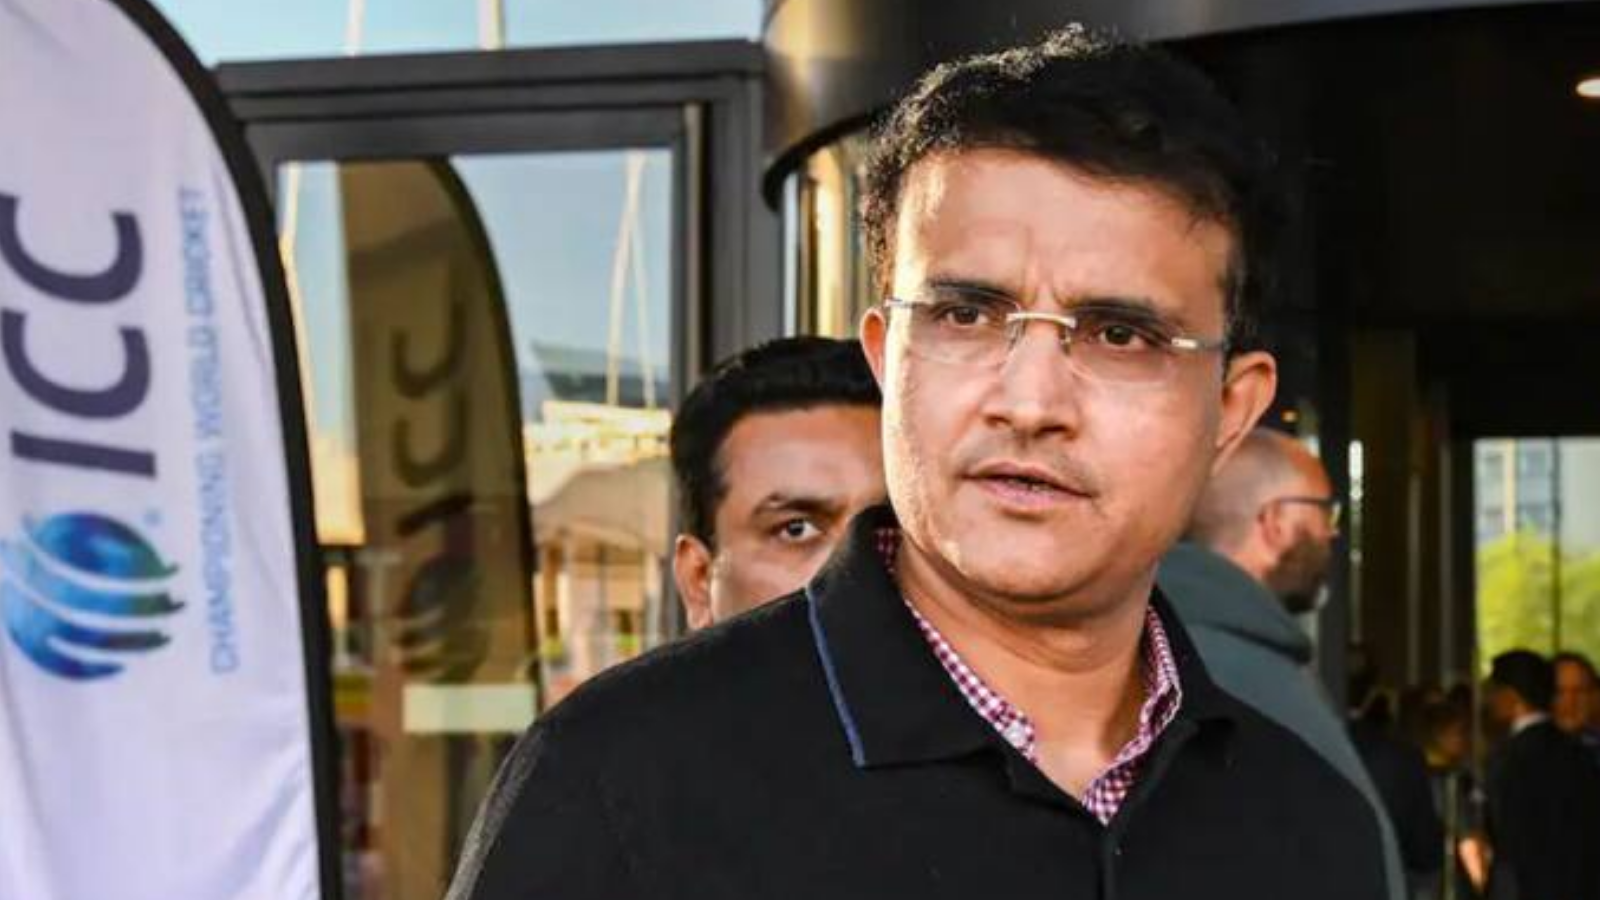 Icc Is Going To Introduce New Rules In The World Test Championship Final Under The Leadership Of Sourav Ganguly